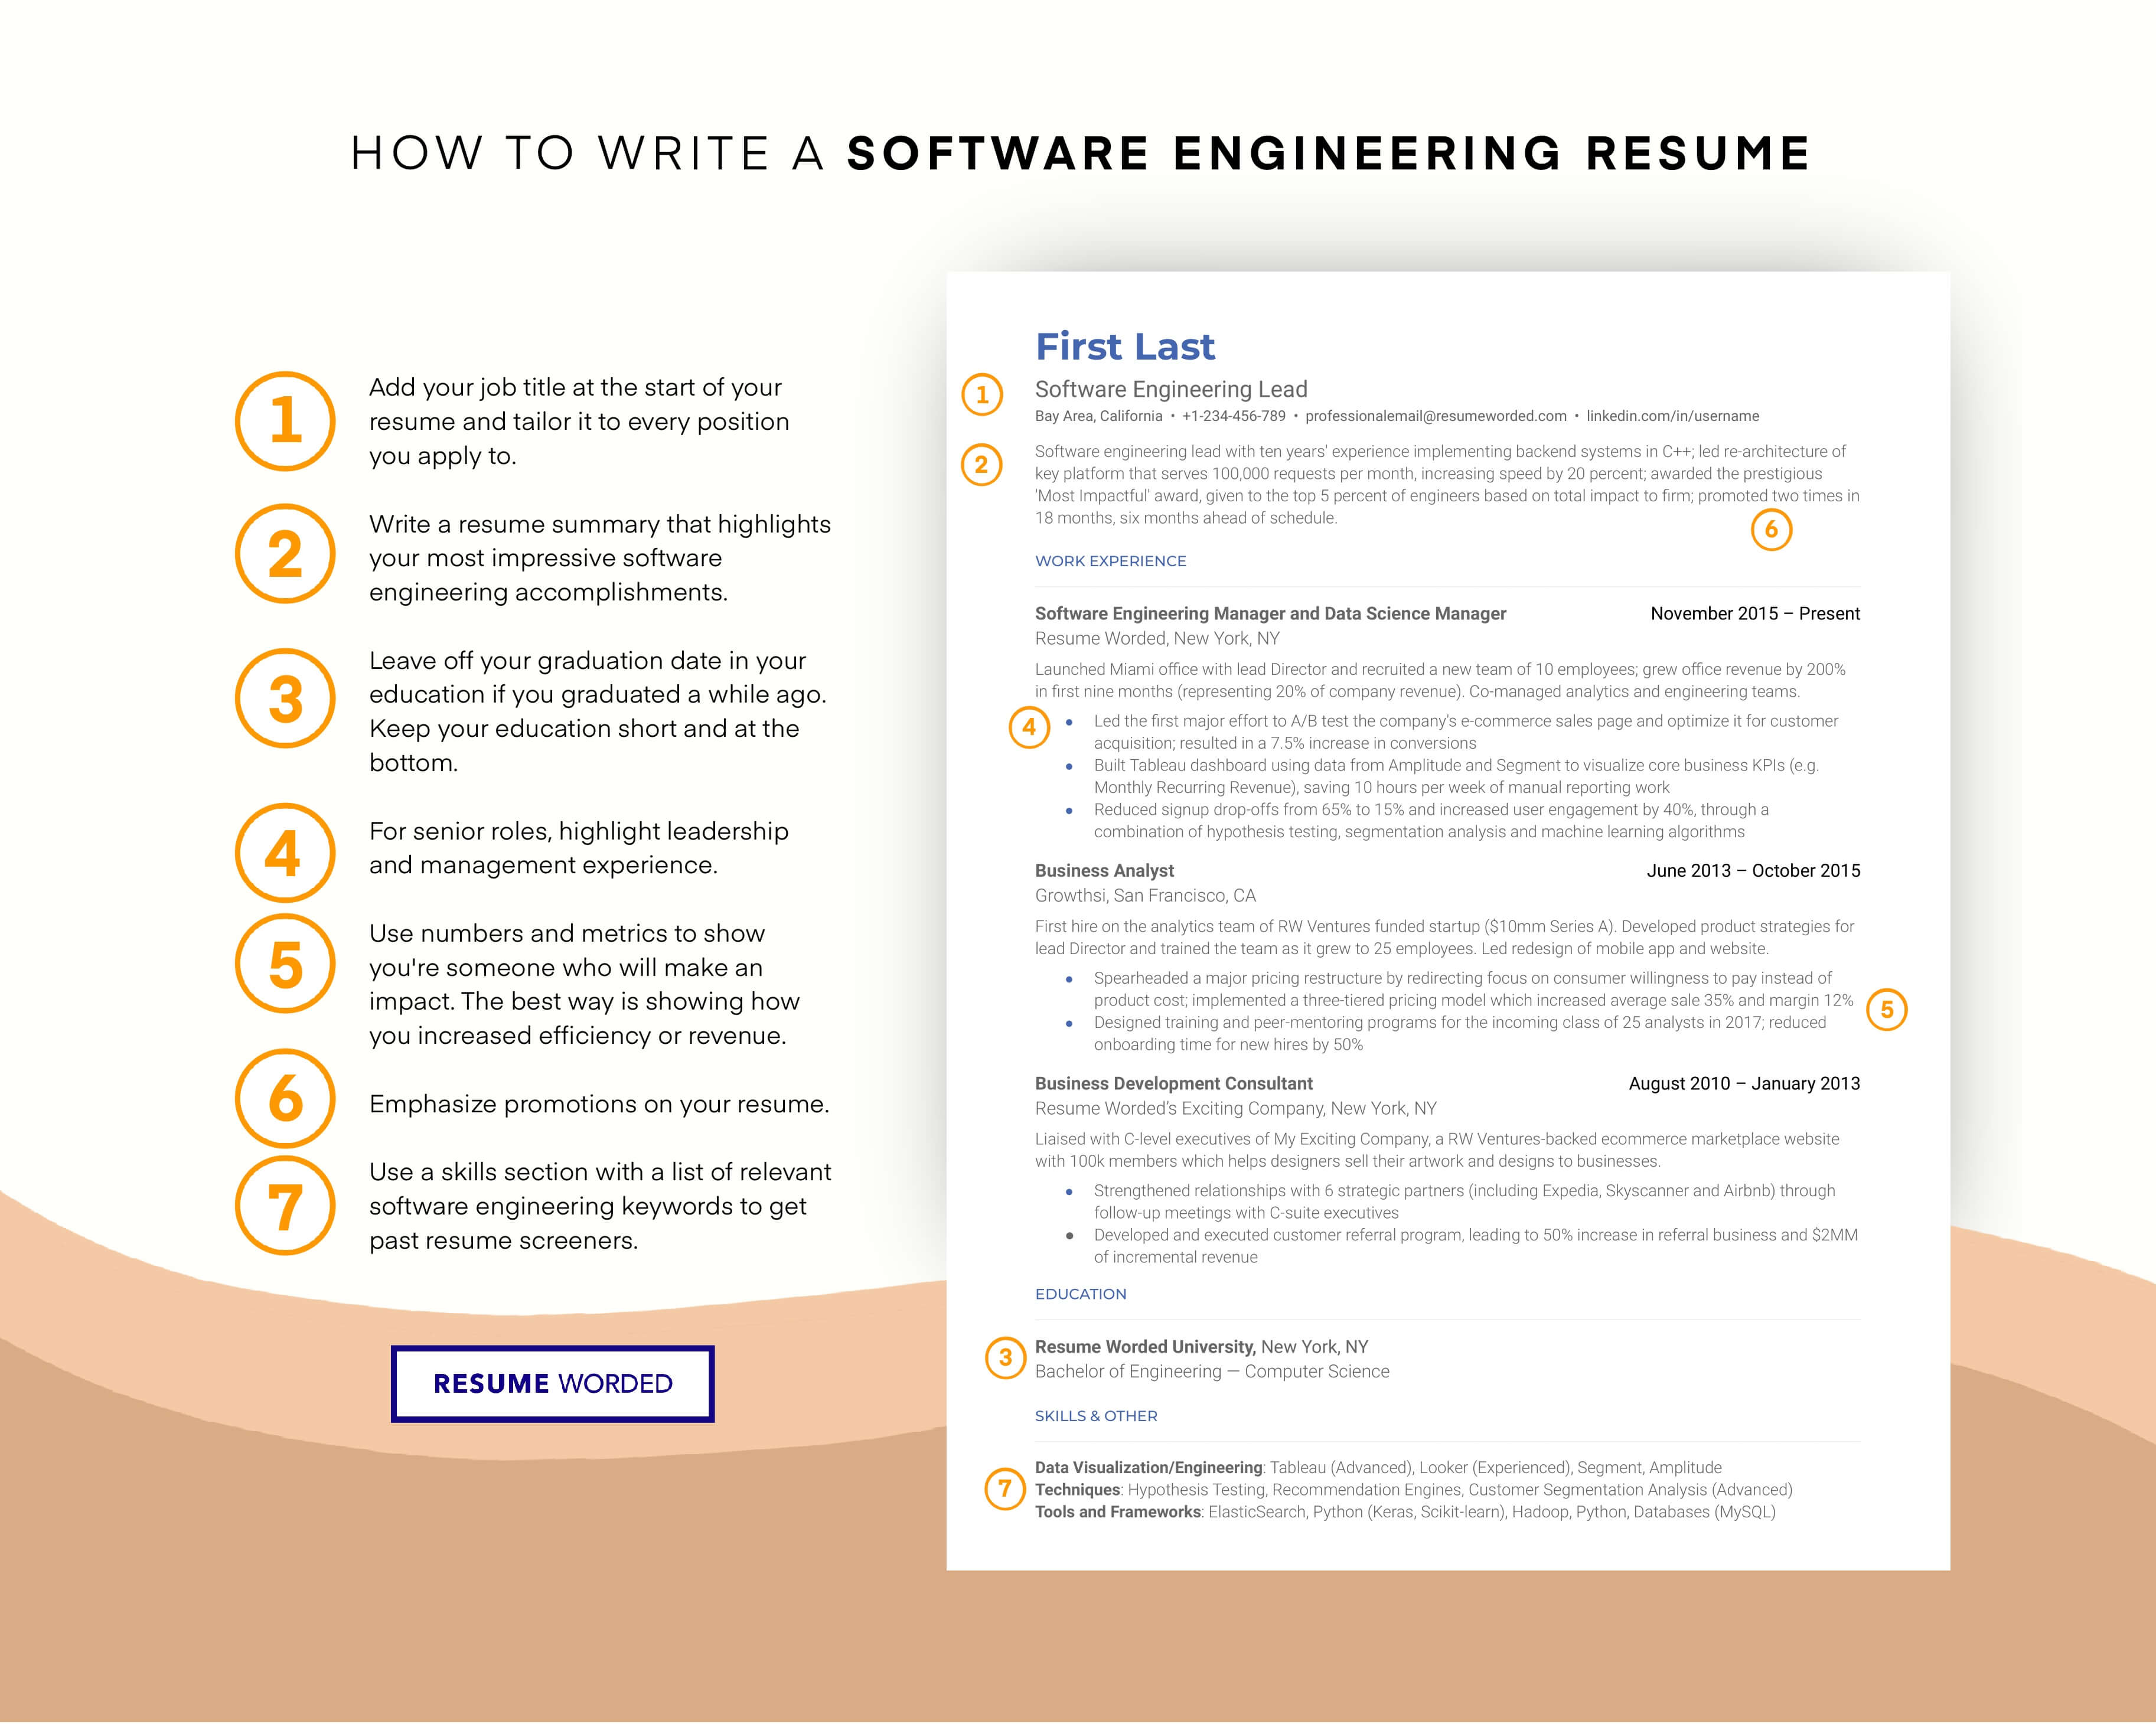 Skills section reflects new trends in the QA industry and QA software - QA (Quality Assurance) Engineer Resume